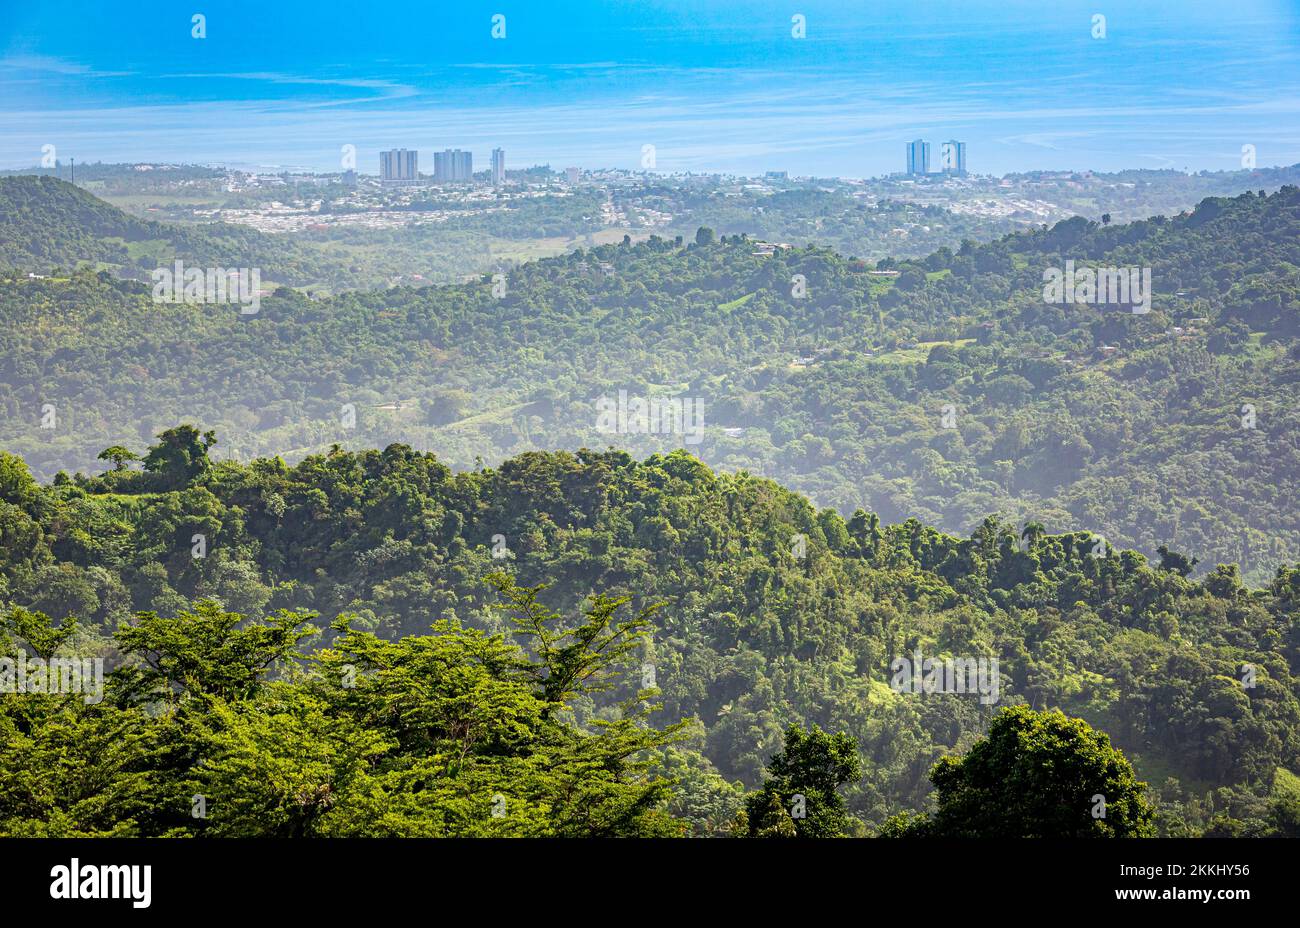 Luquillo and the Caribbean as seen from the Yunque Rainforest National Park, on the tropical island of Puerto Rico, USA. Stock Photo